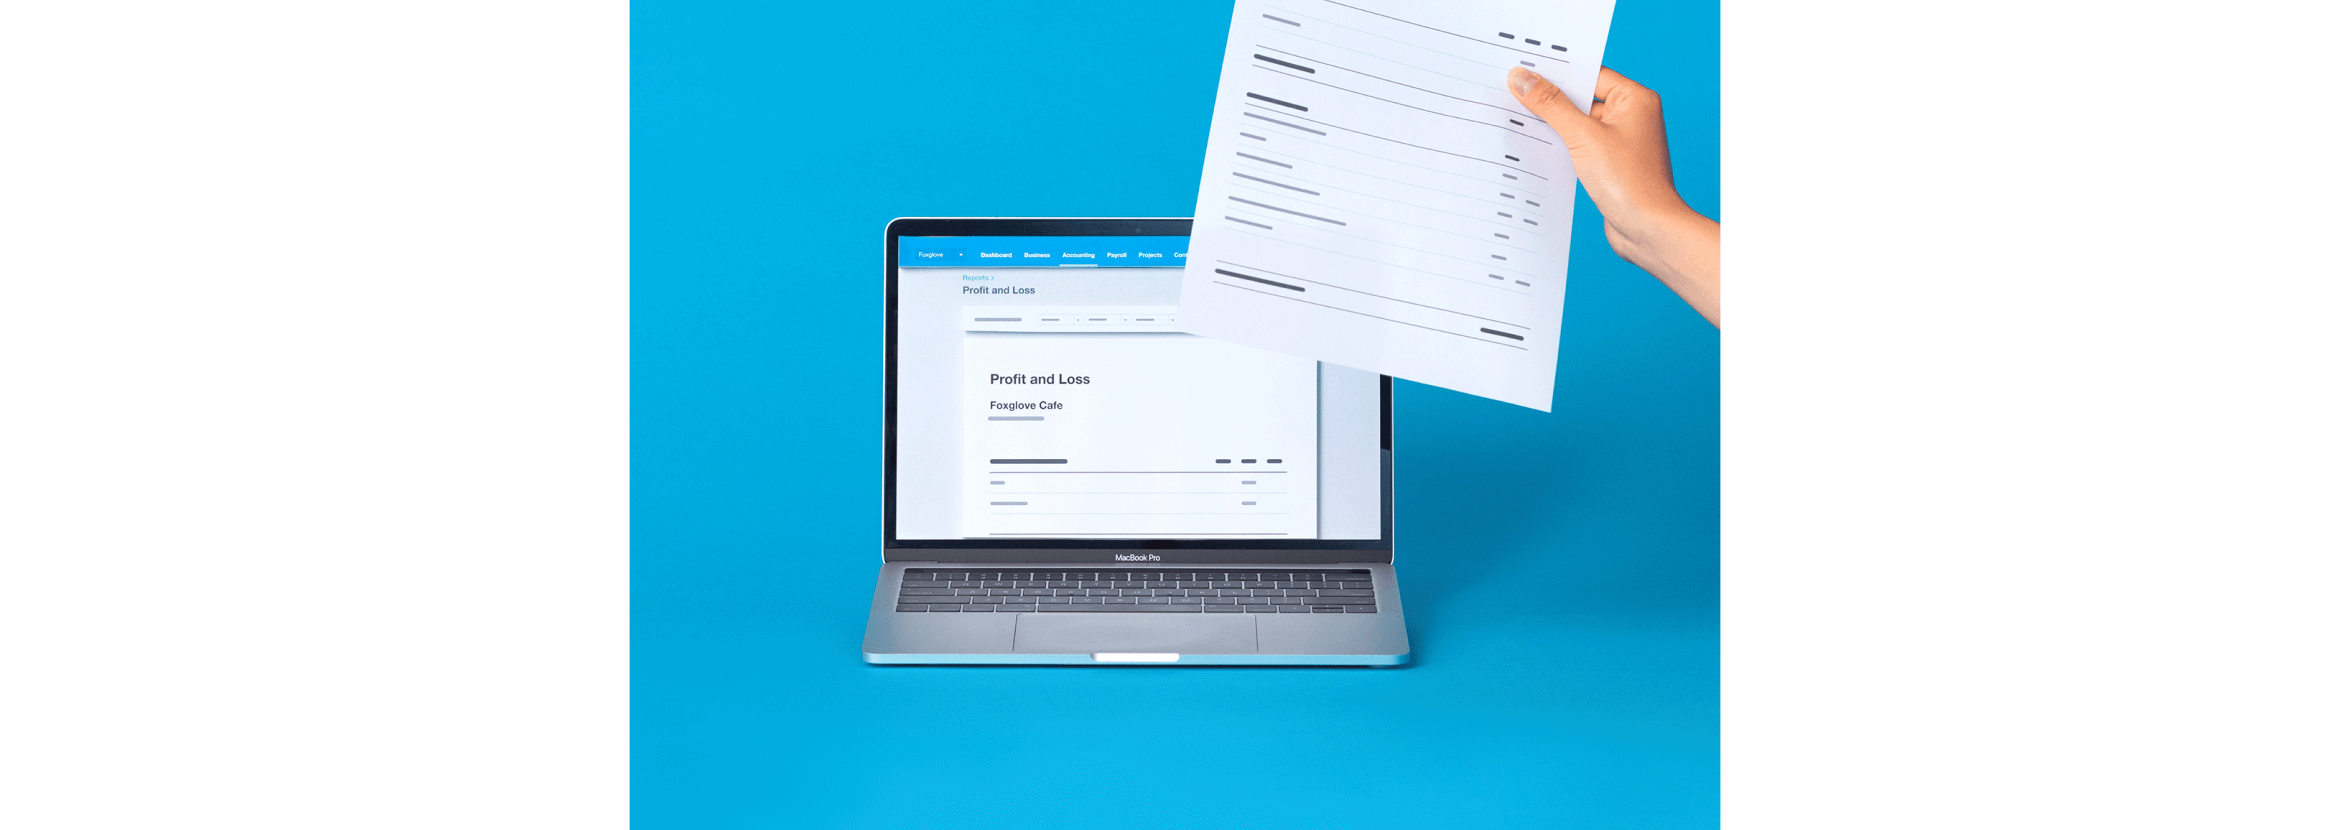 A computer is open on a Xero profit and loss screen, with a hand beside it holding a financial paper.